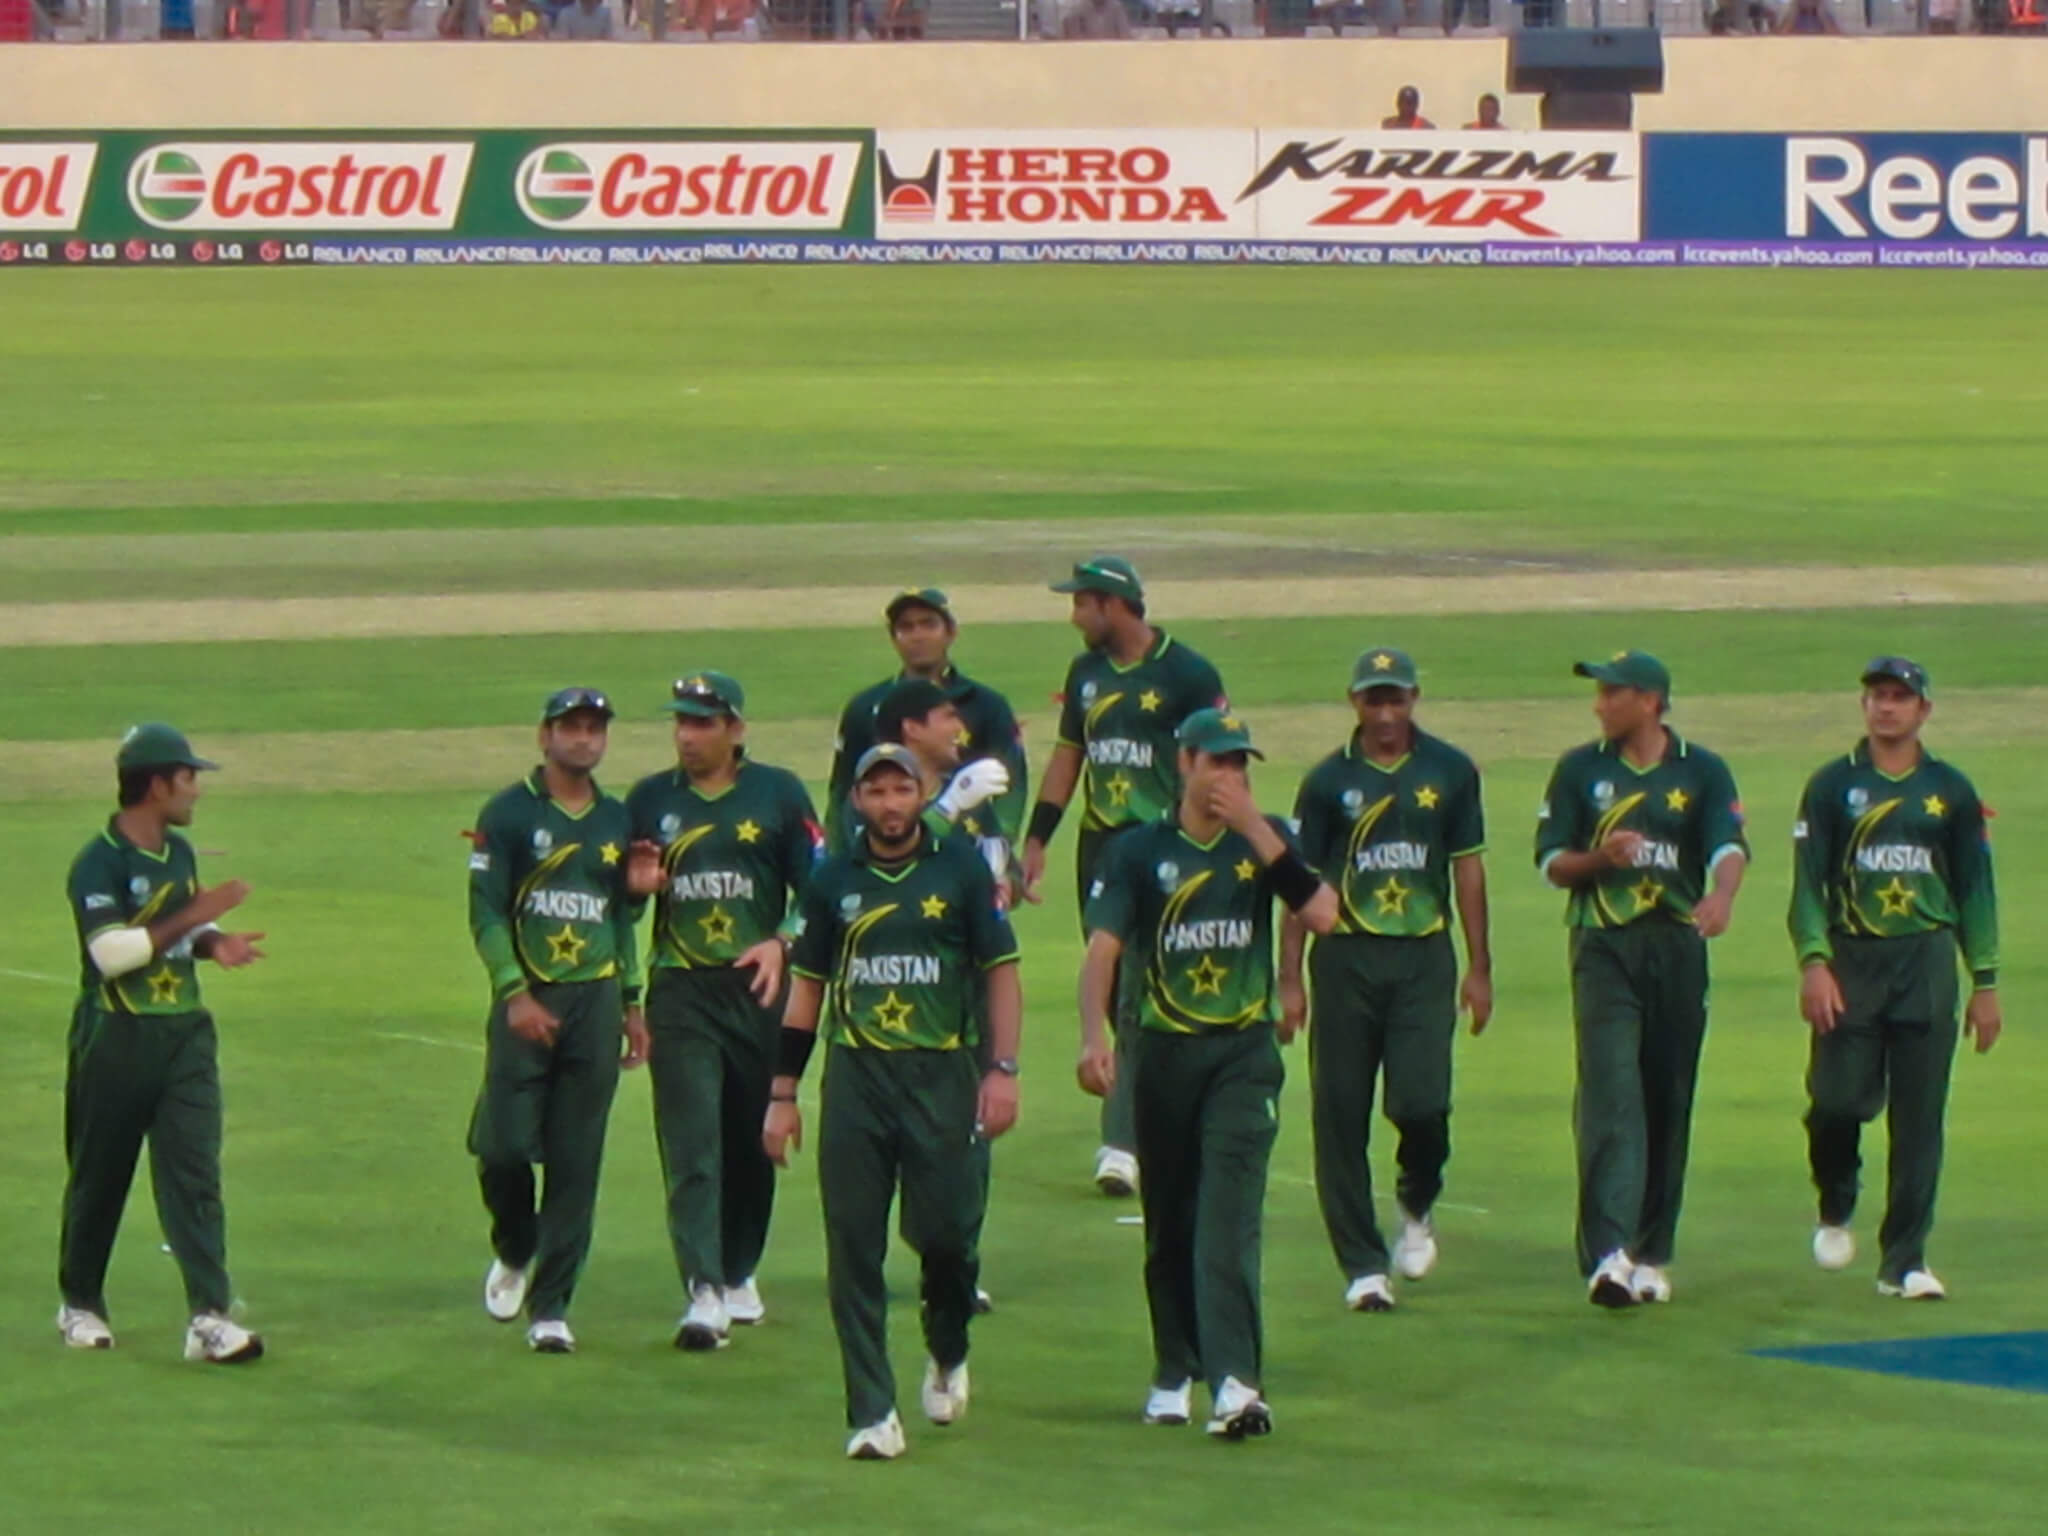 Pakistan team for the West Indies